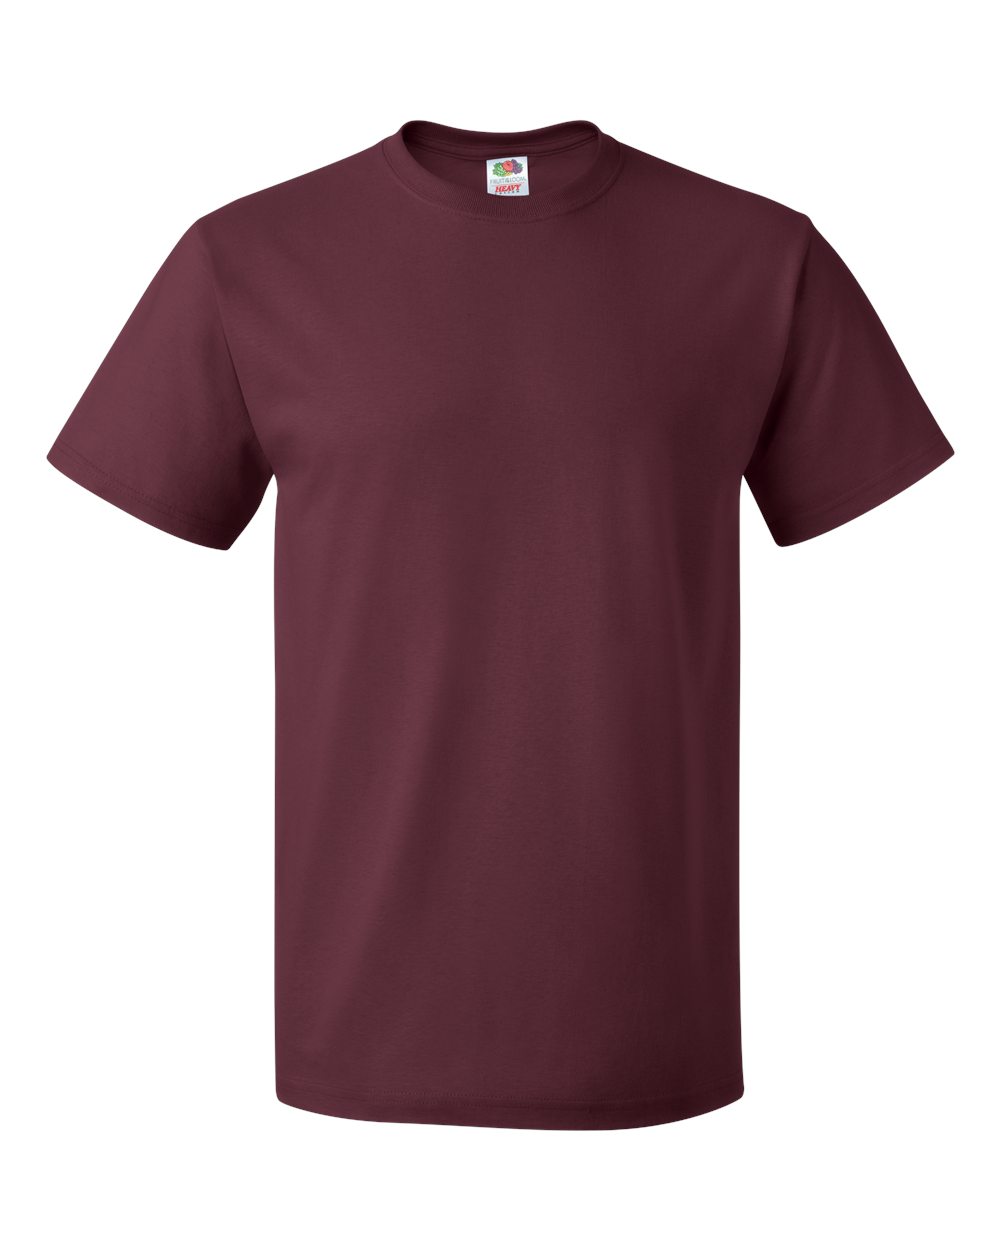 click to view maroon